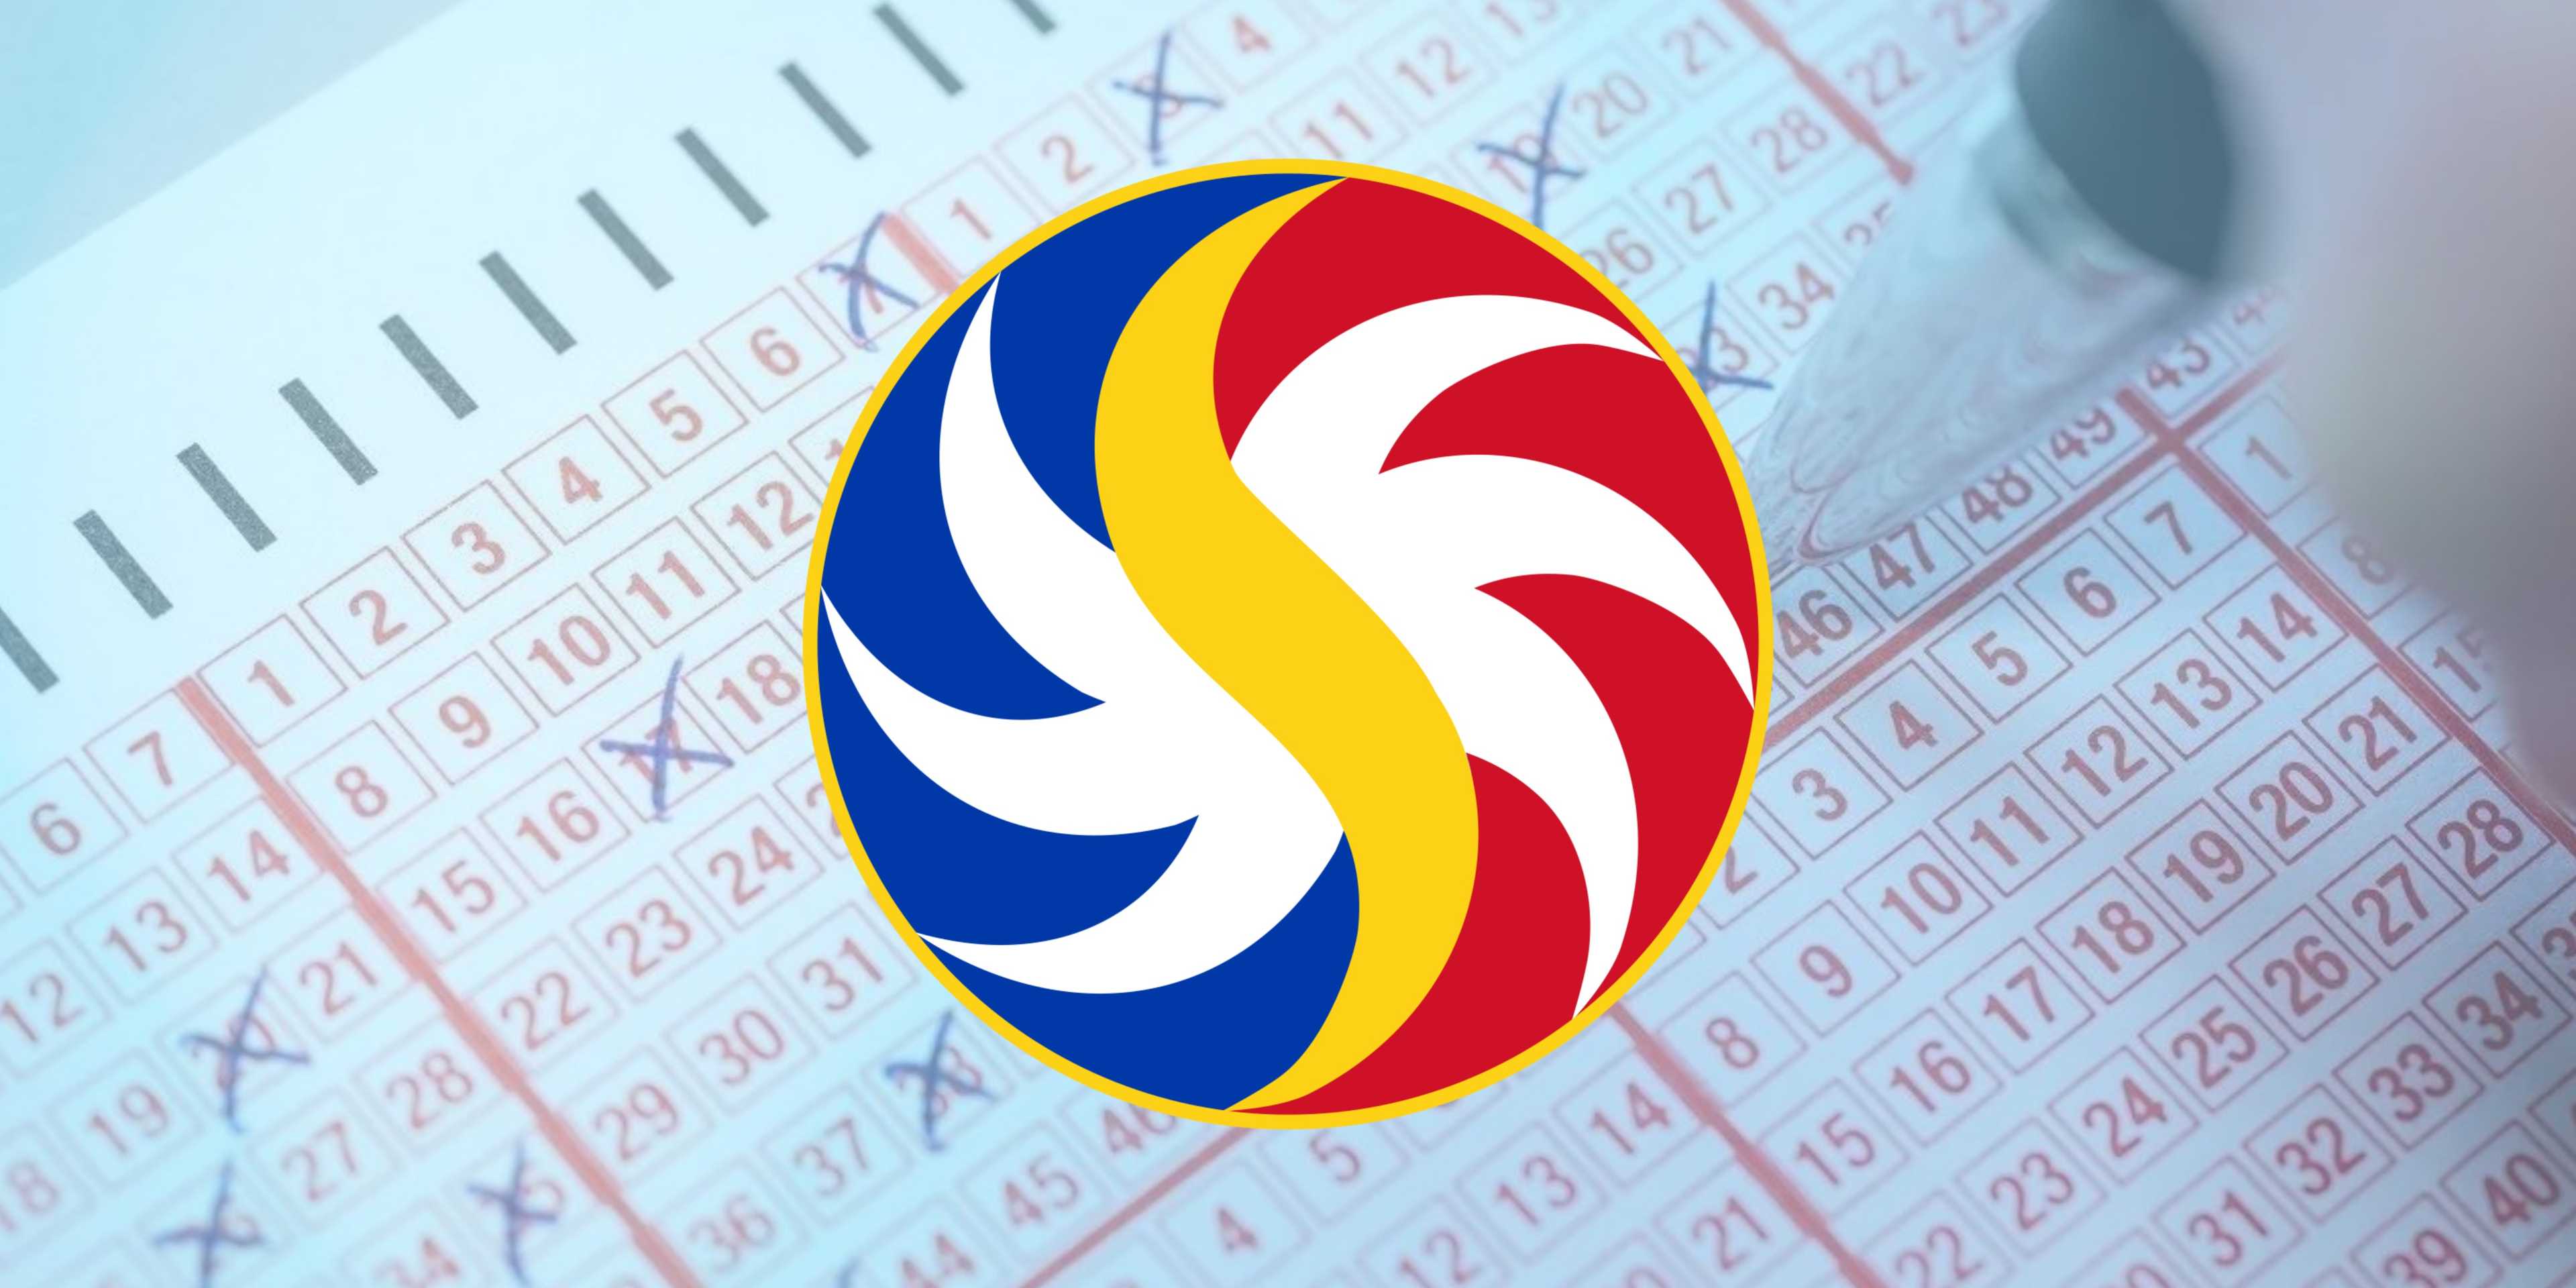 PCSO Lotto Draw Results on Tuesday, February 27